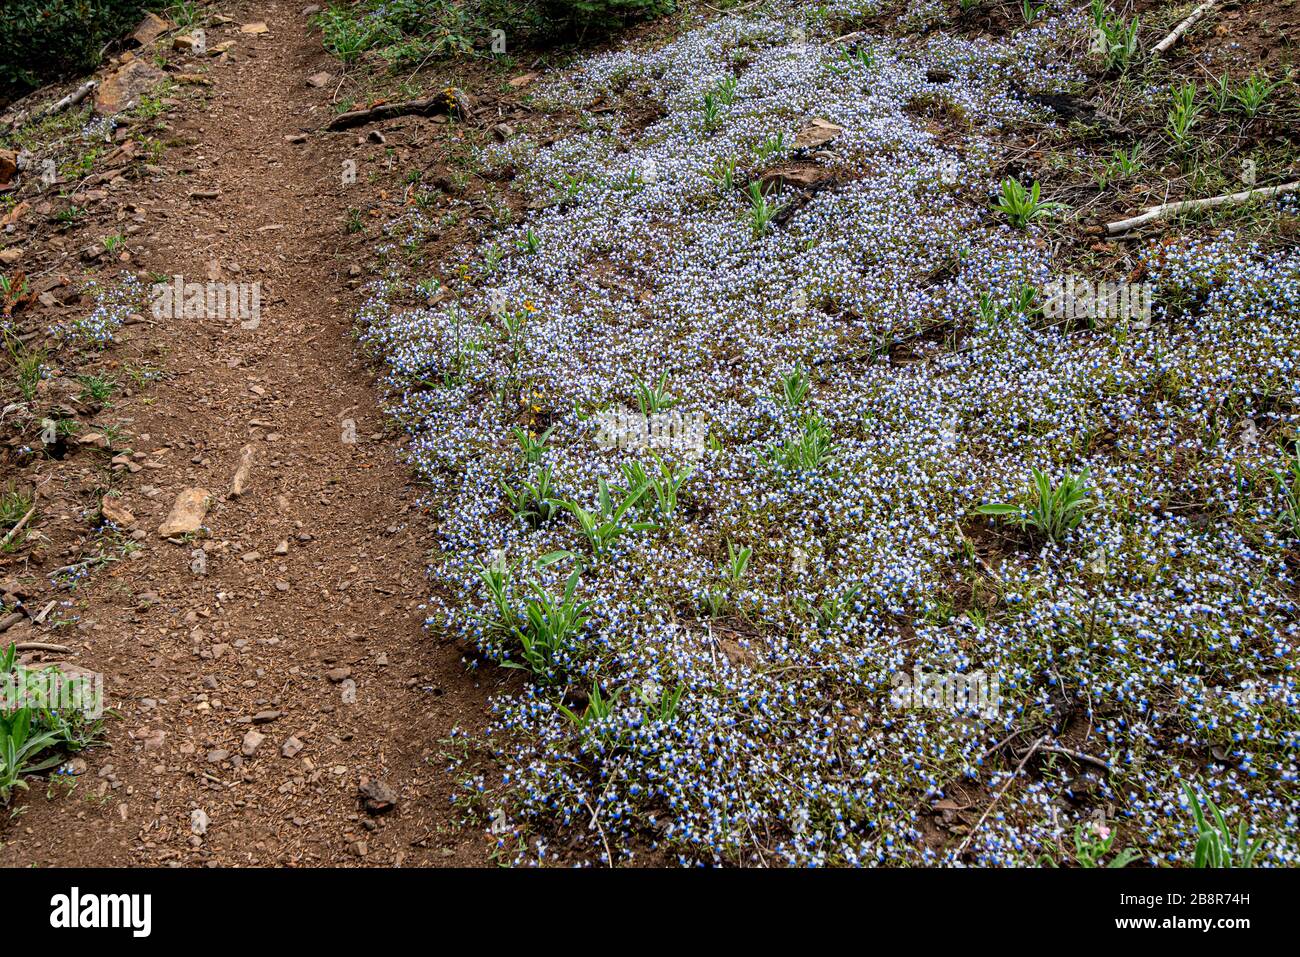 Popcorn flowers grow along a trail in Sequoia National Park in Spring. Stock Photo